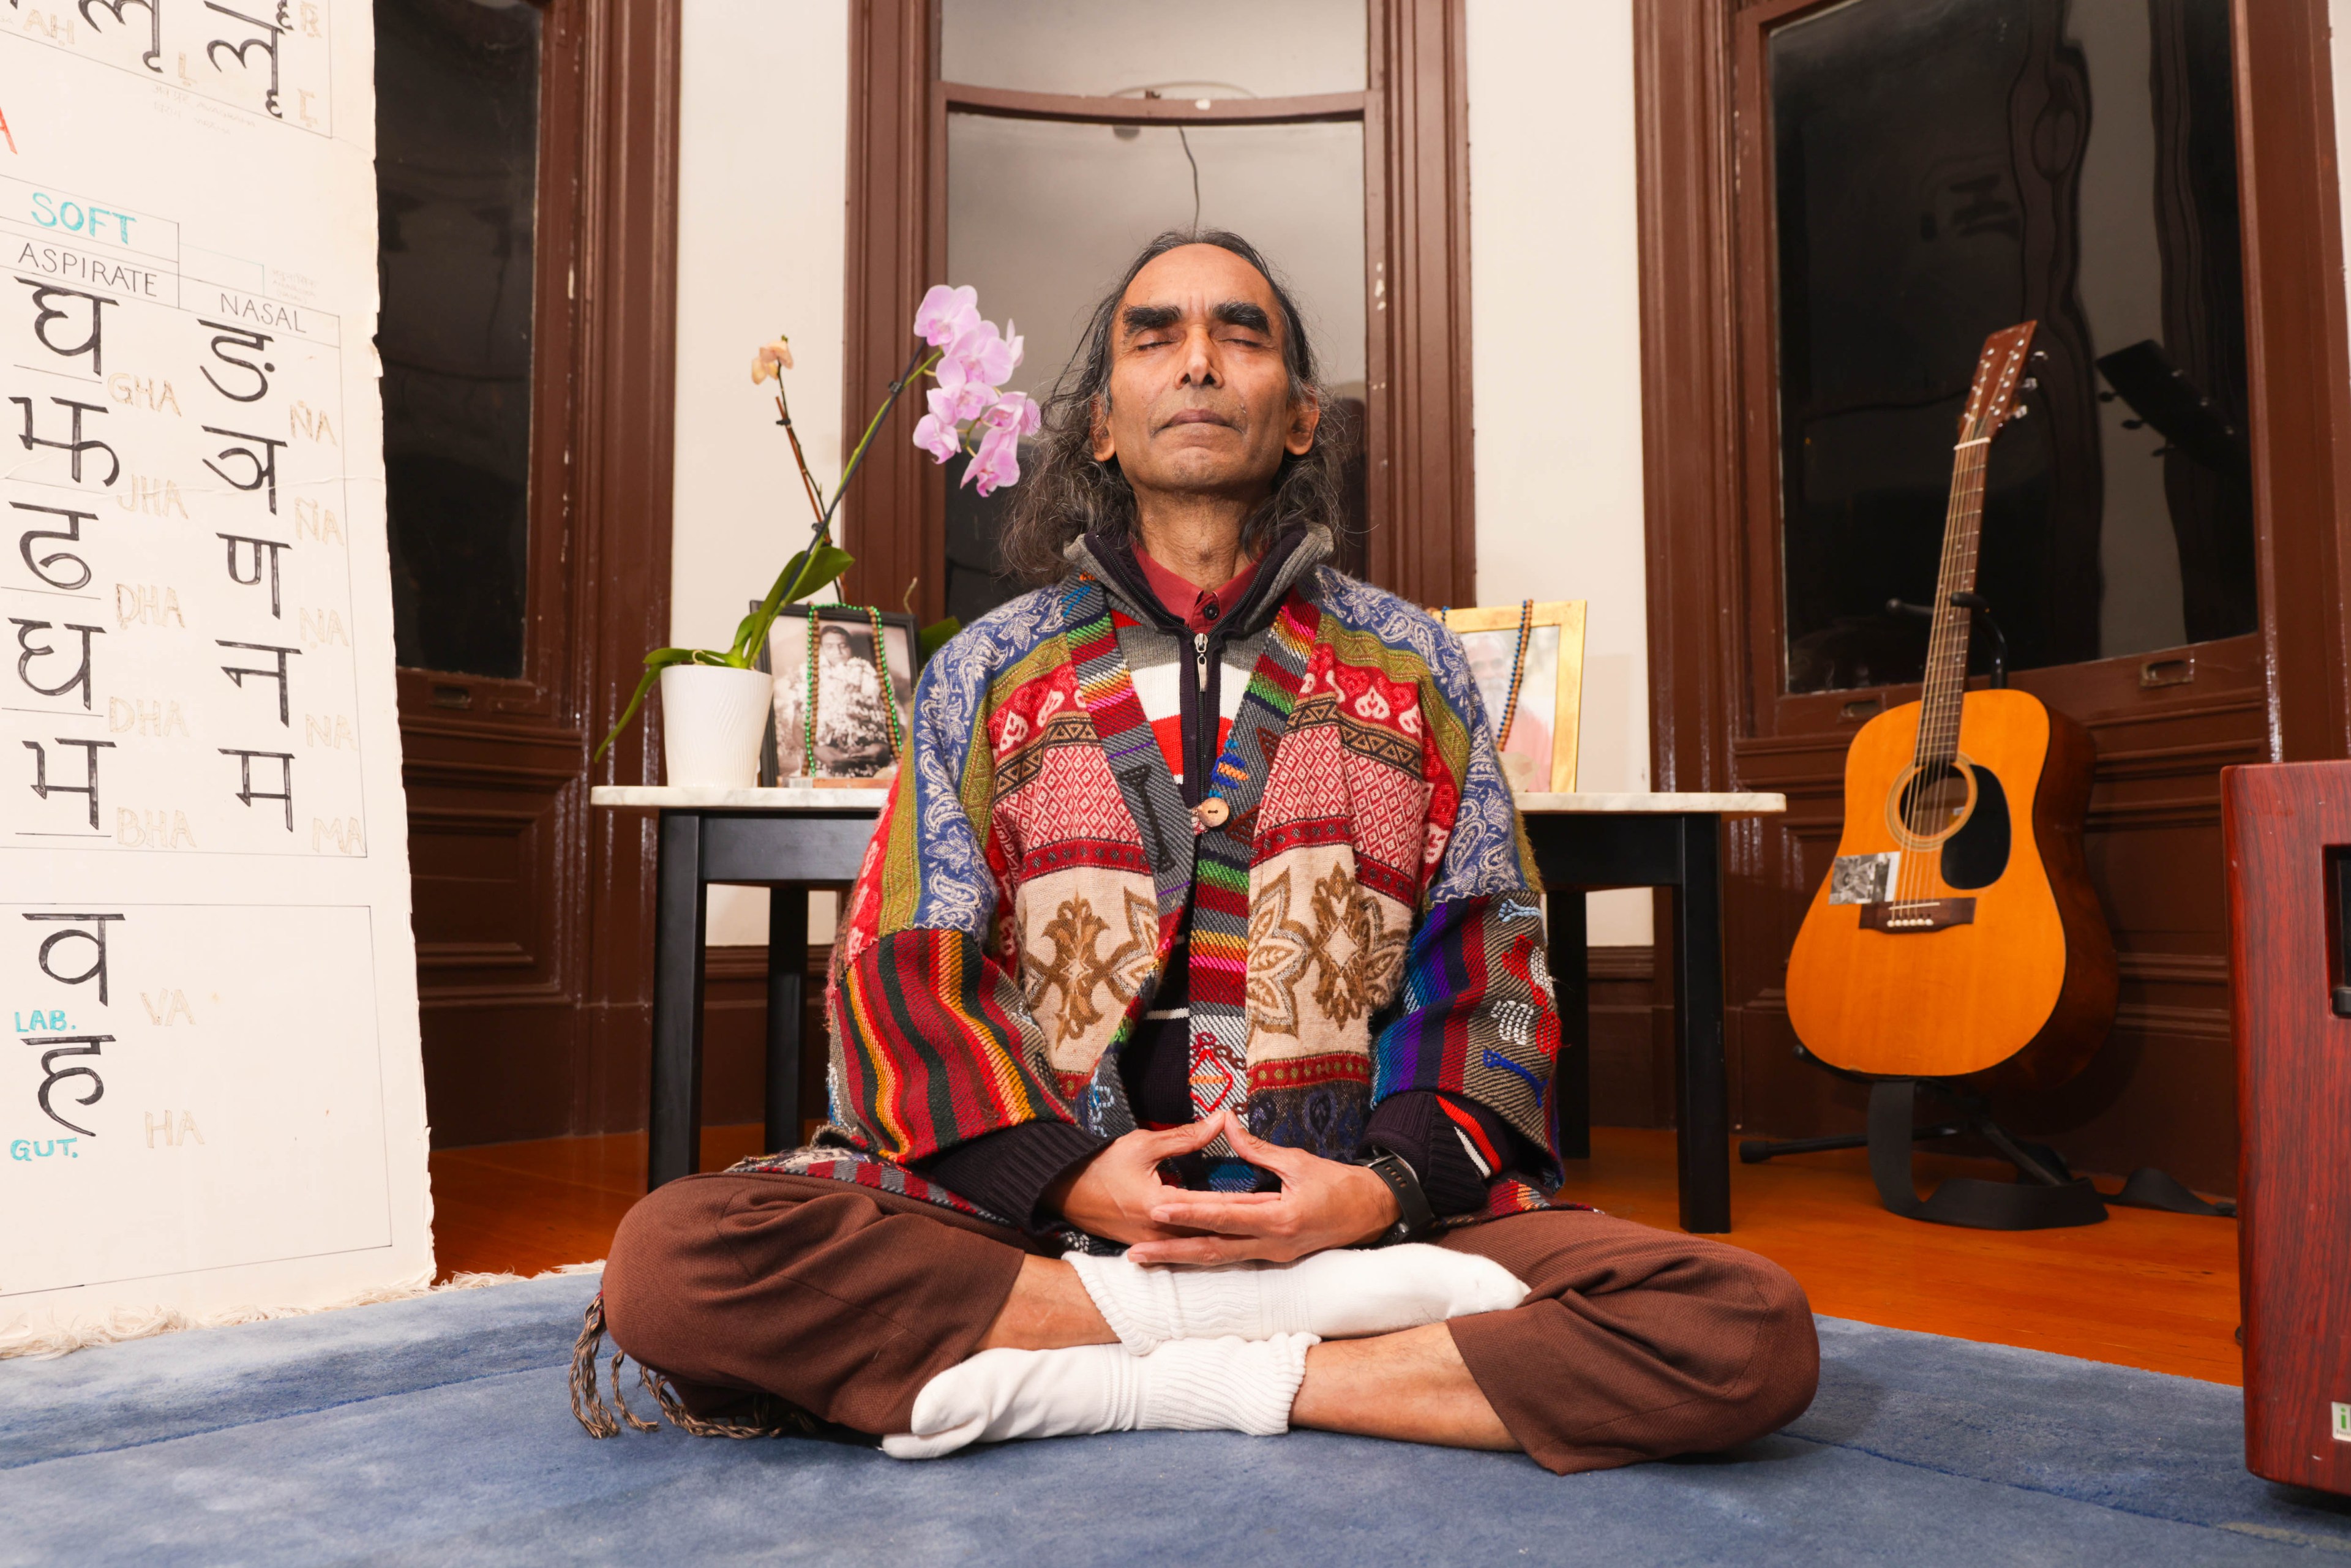 A man sitting in a yoga pose with a guitar and Sanskrit in the background.